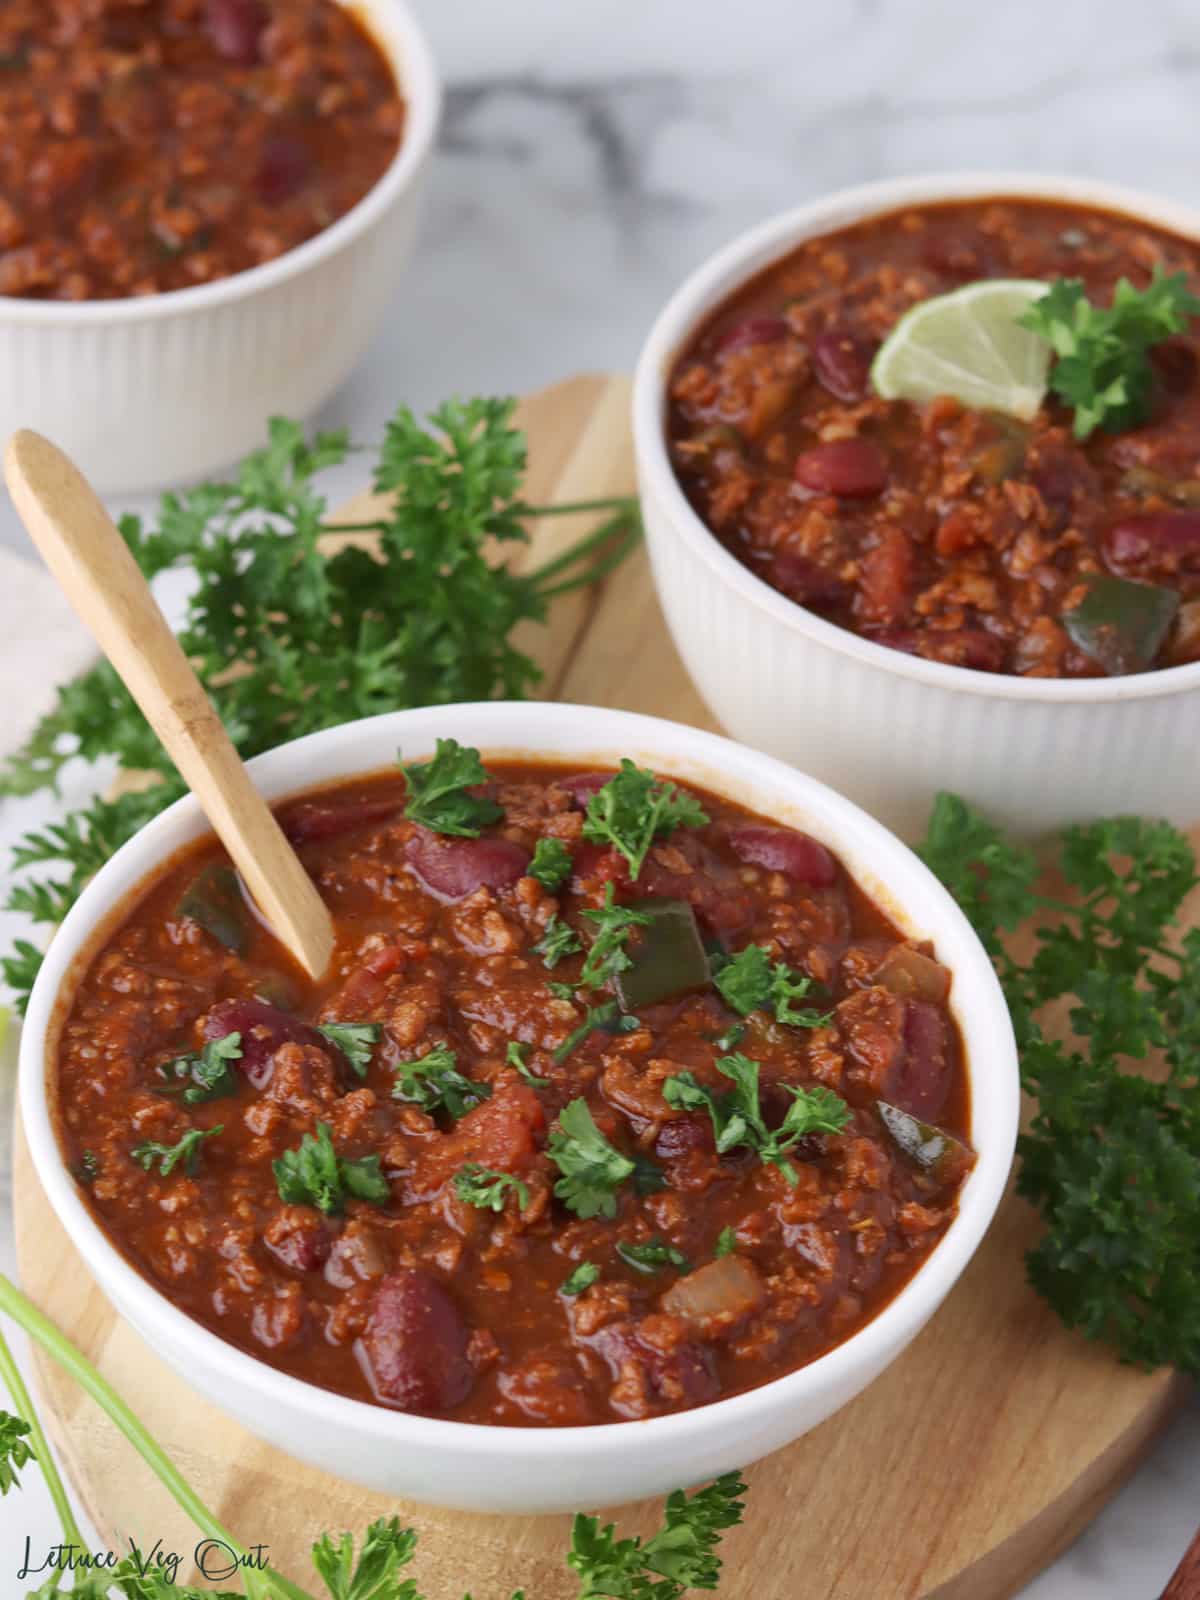 Two bowl of TVP chili on a wood board garnished with chopped herbs and lime slices.